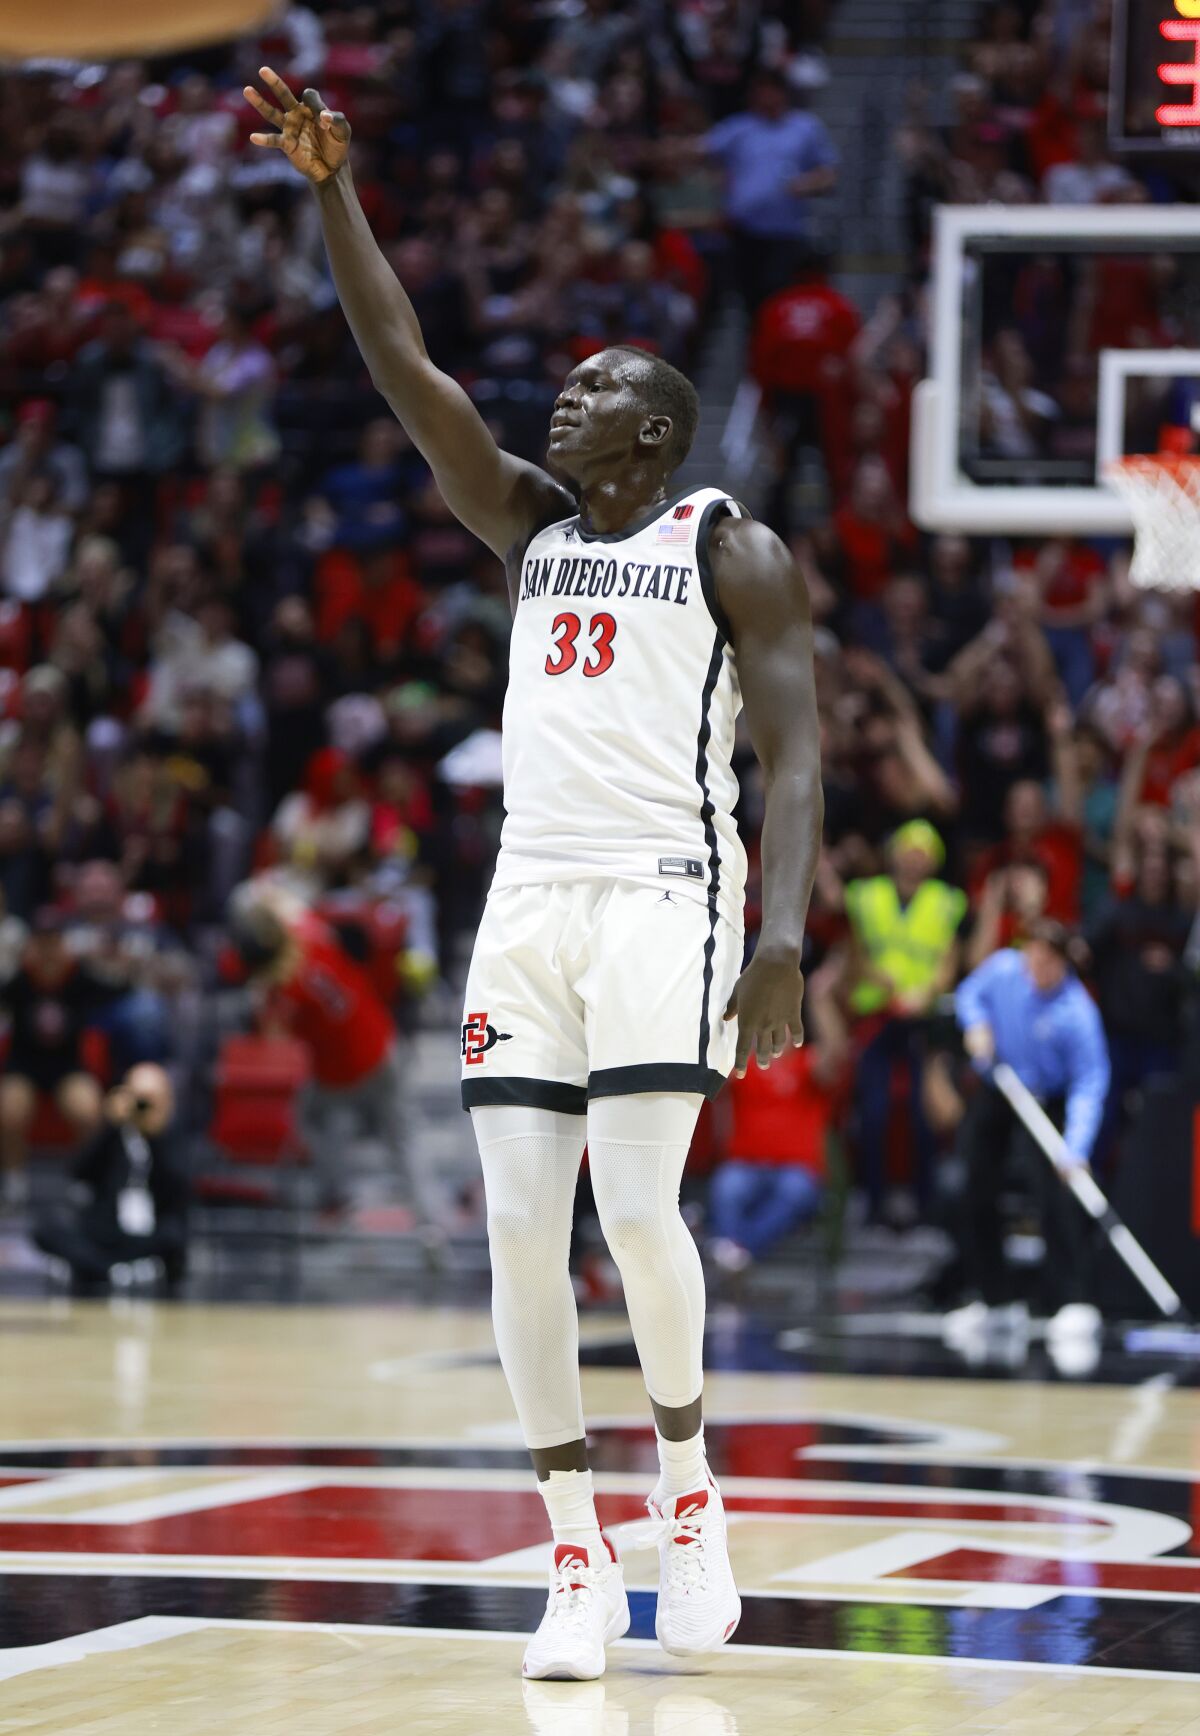 San Diego State's Aguek Arop celebrates after making a three-pointer against Boise State.